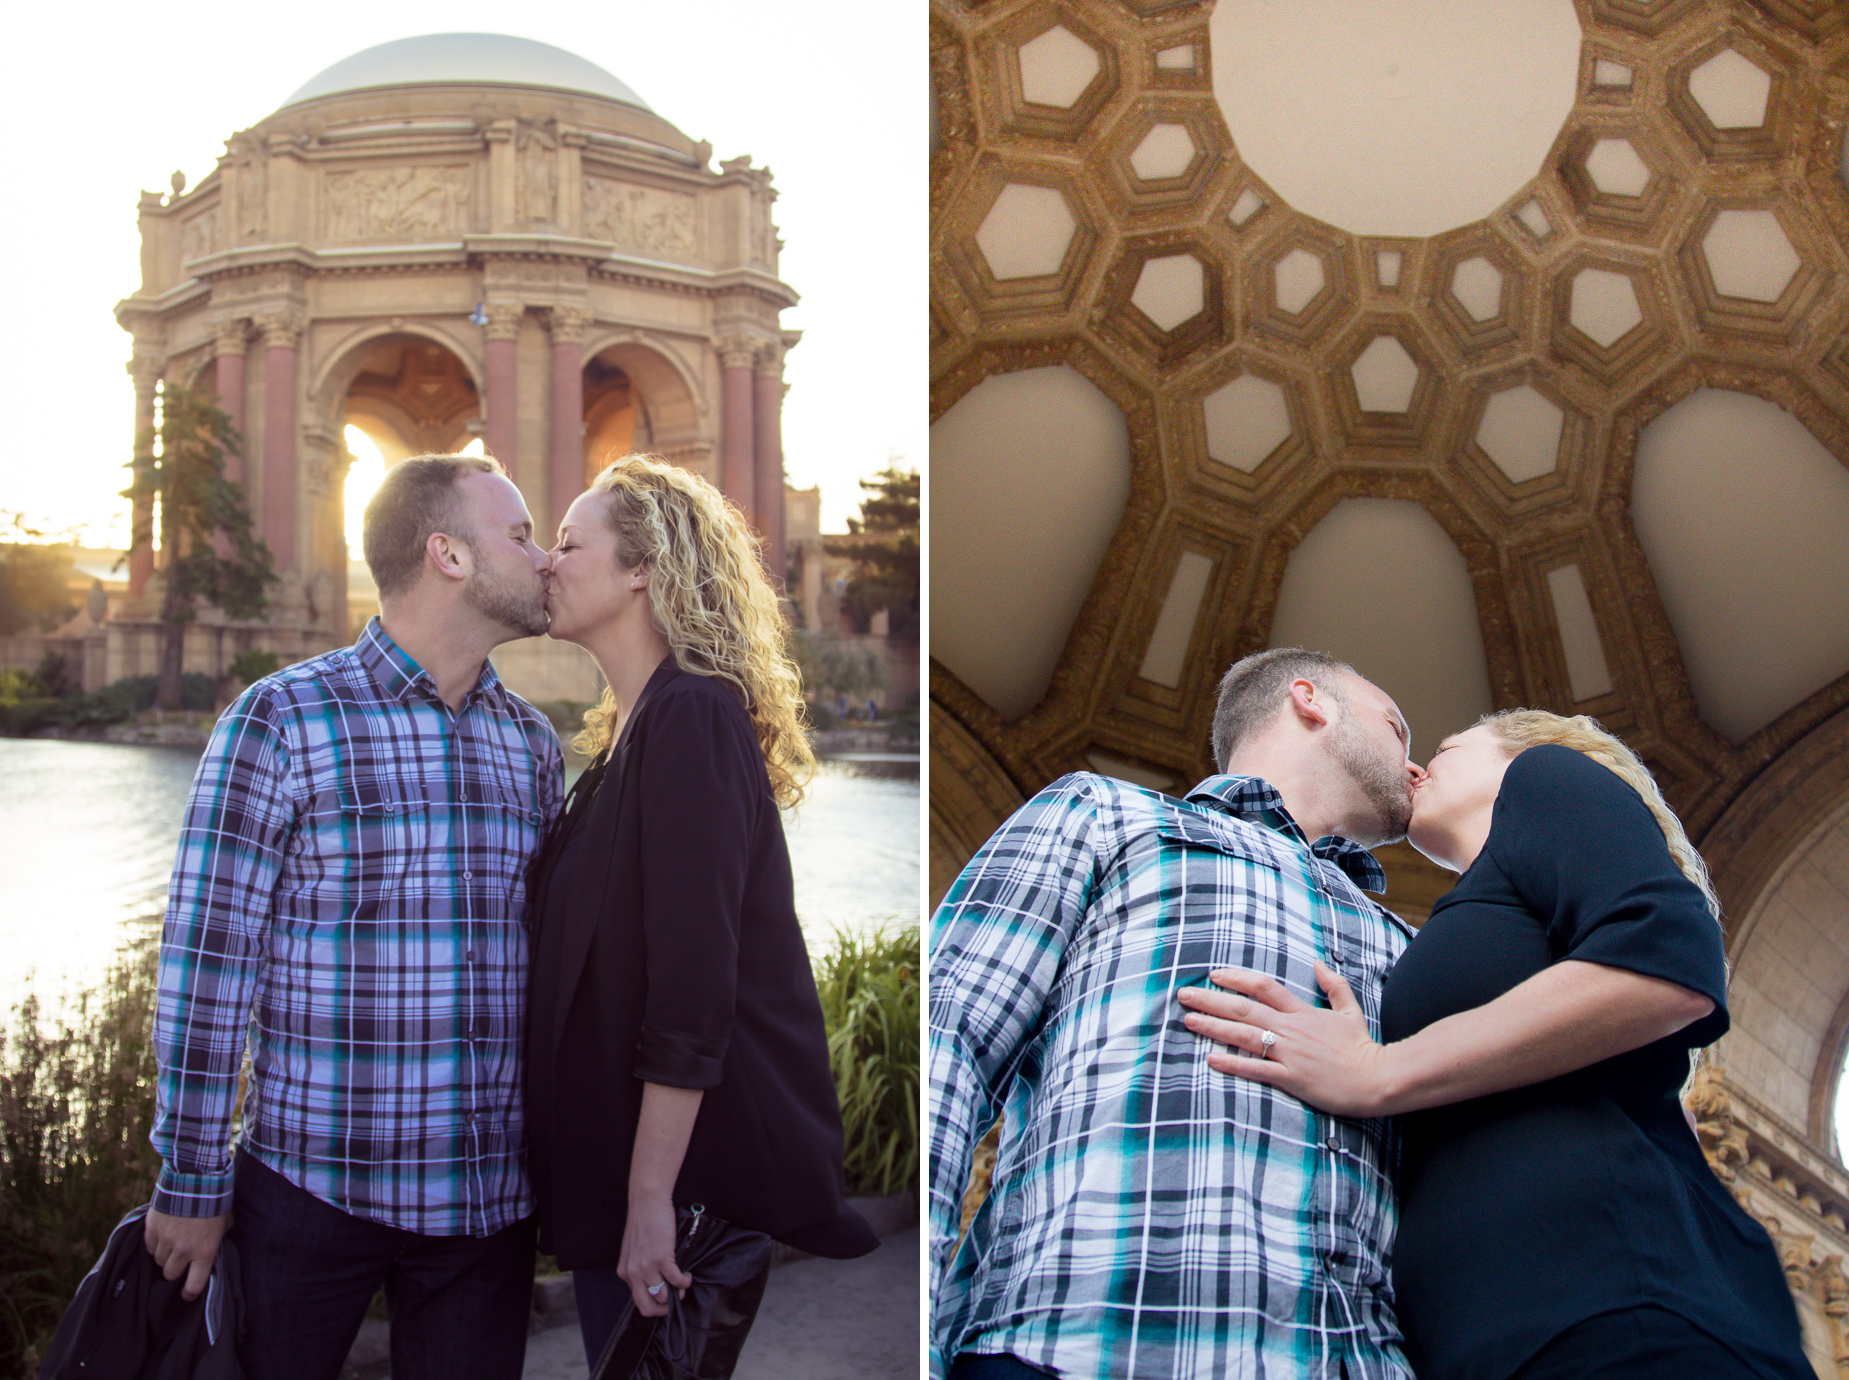 They both love the dome of the Palace of Fine Arts, San Francisco